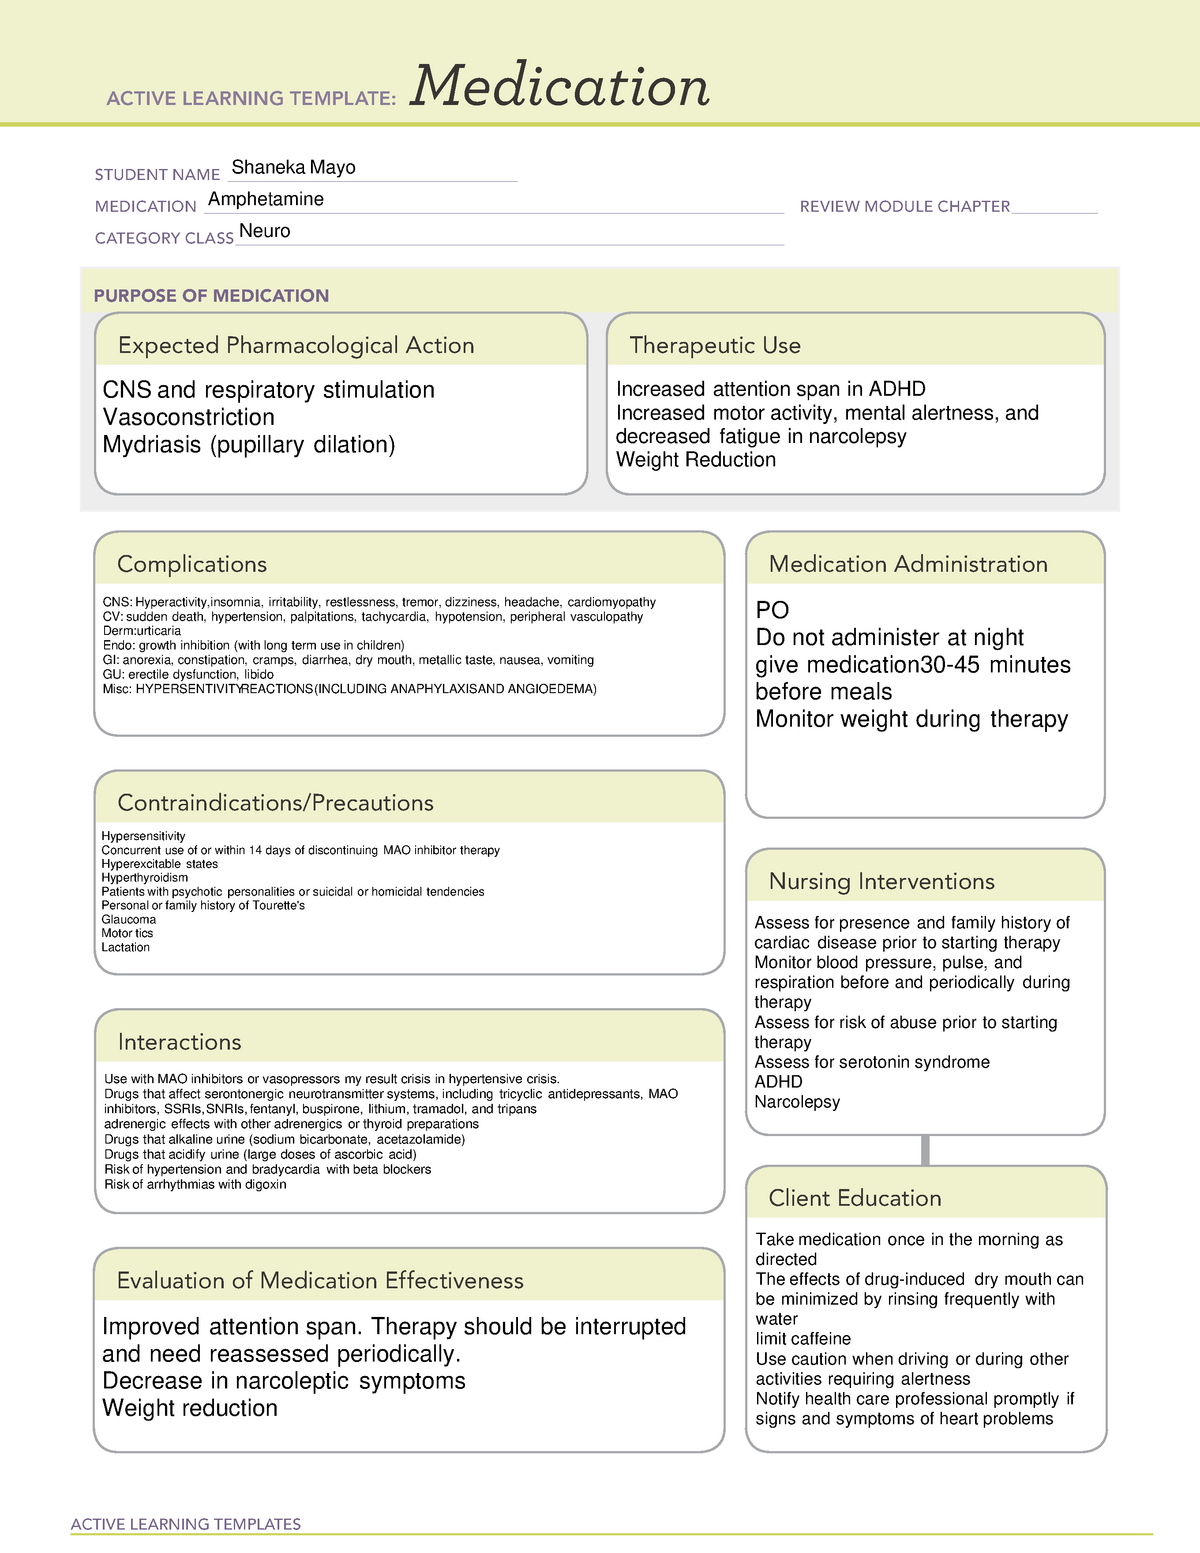 amphetamine-adderall-active-learning-templates-medication-student